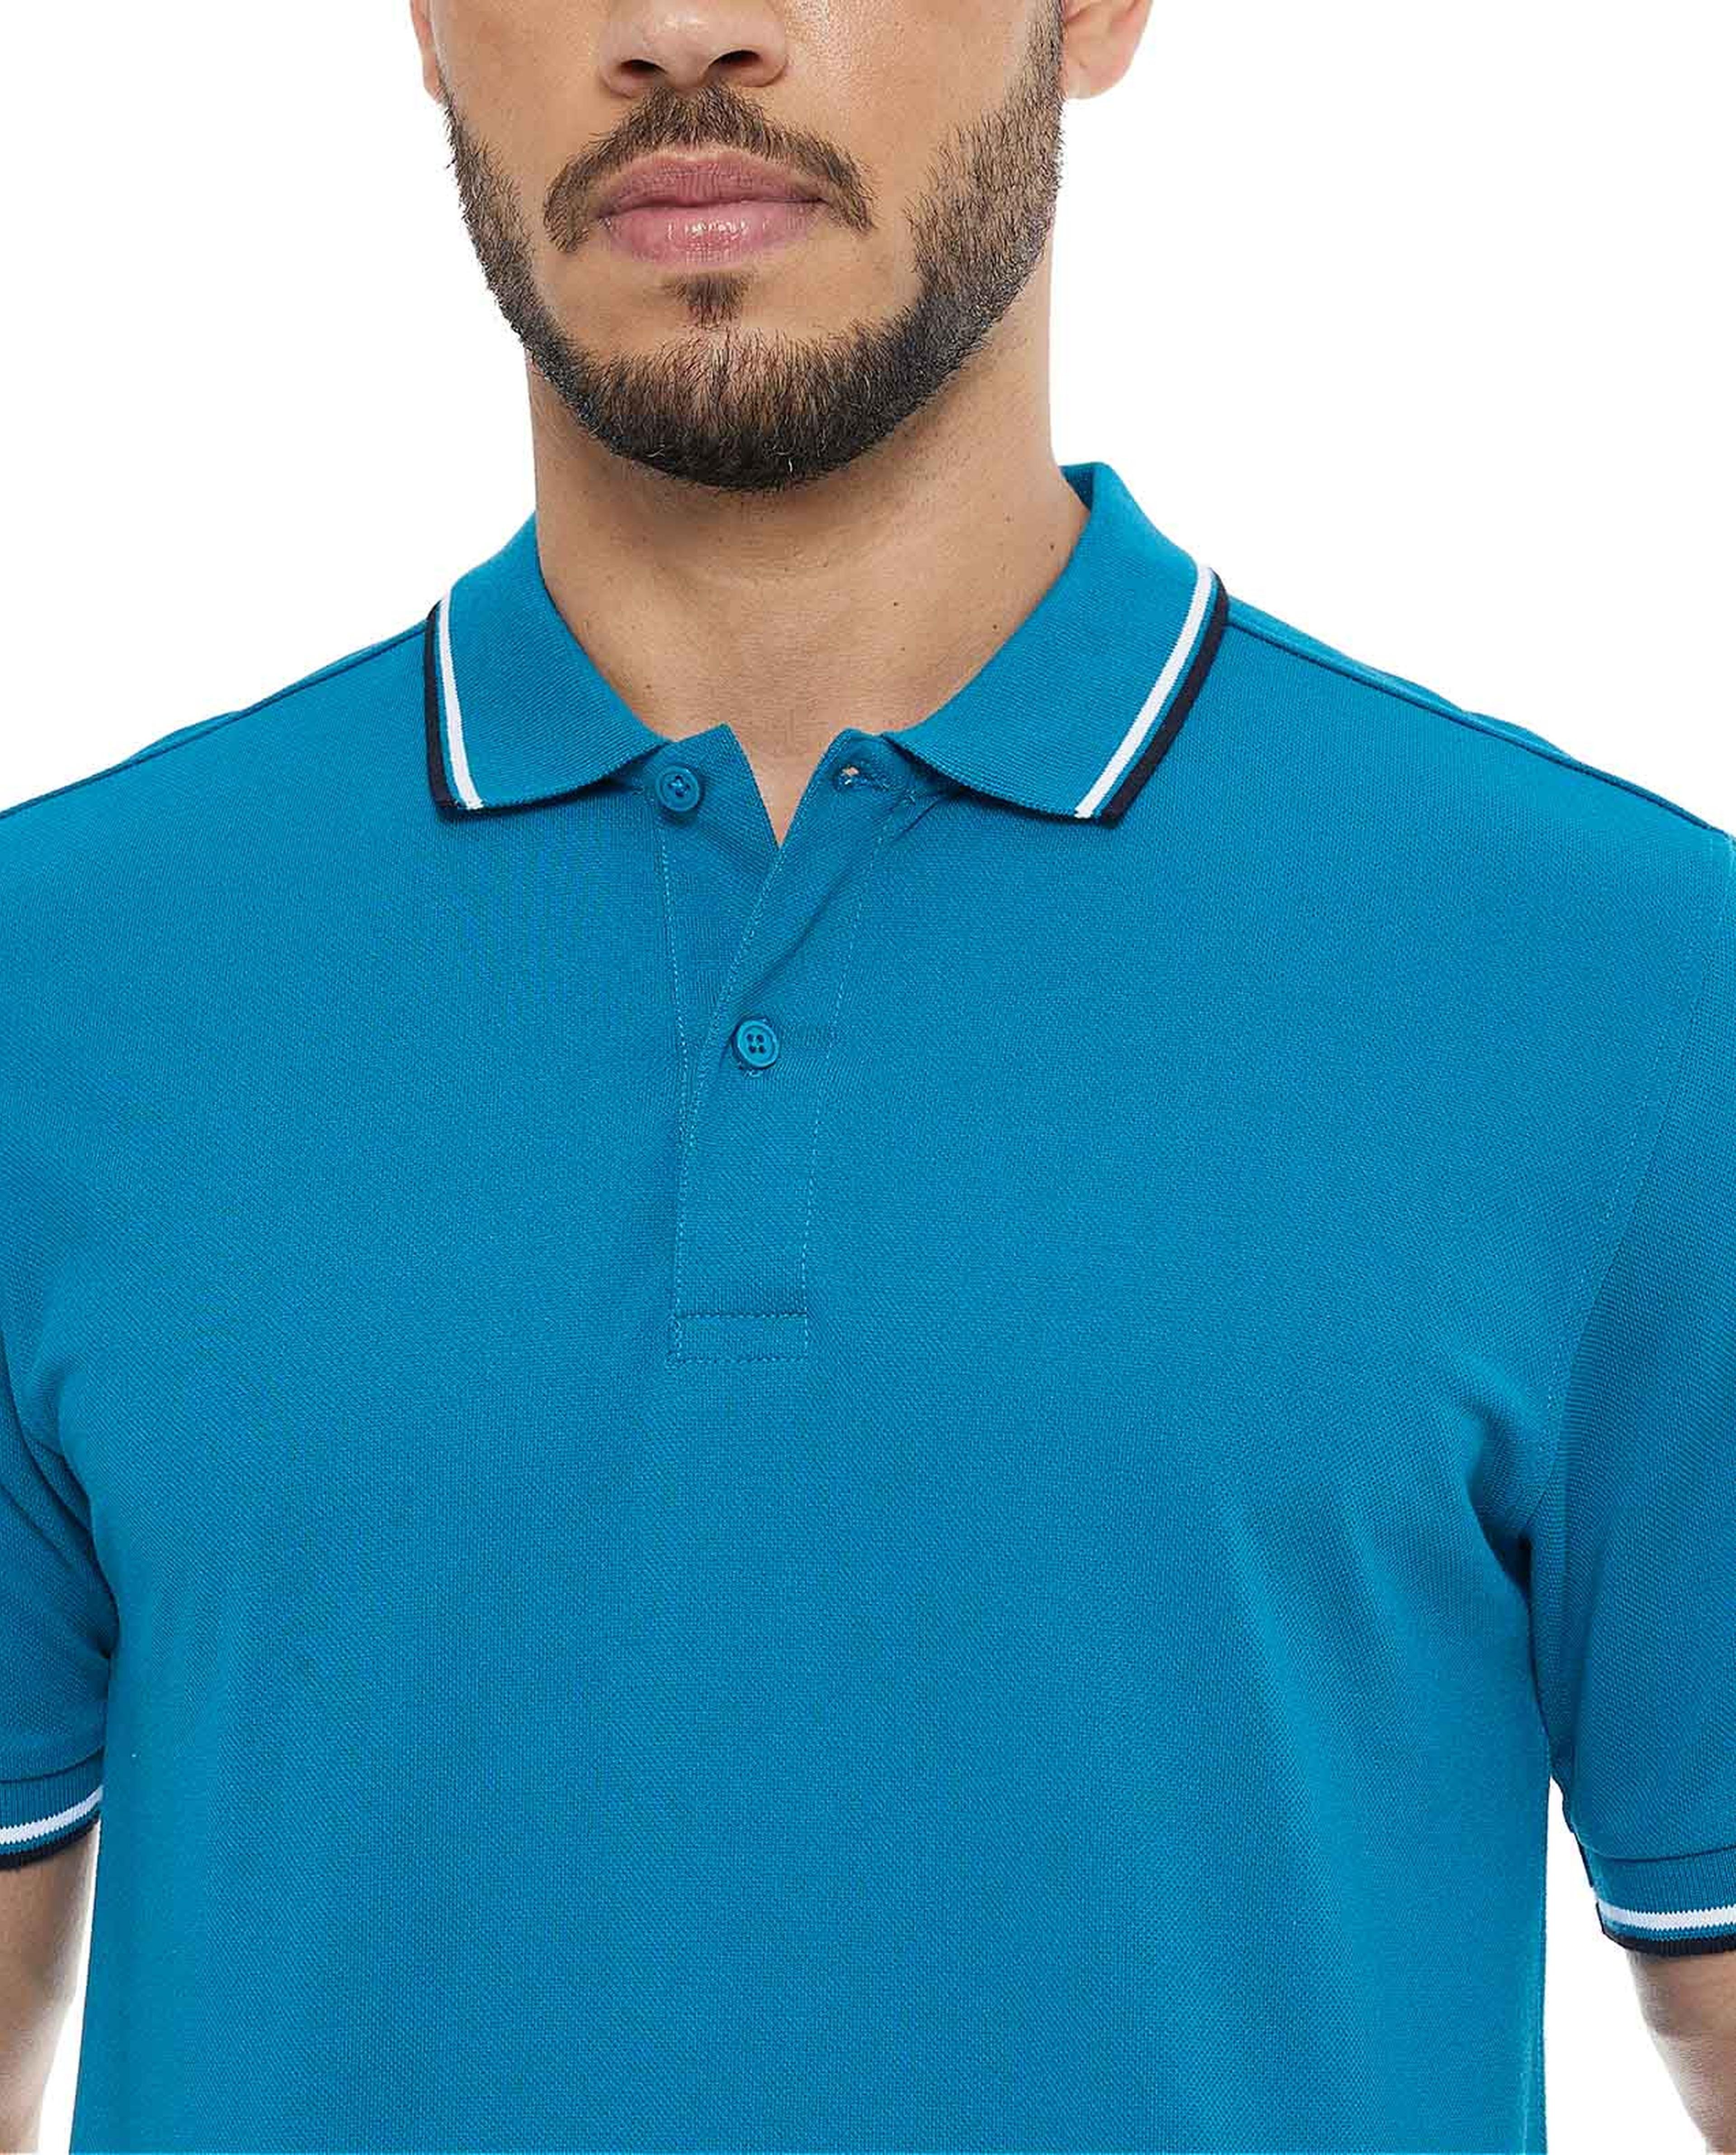 Contrast Tipping Polo T-Shirt with Short Sleeves